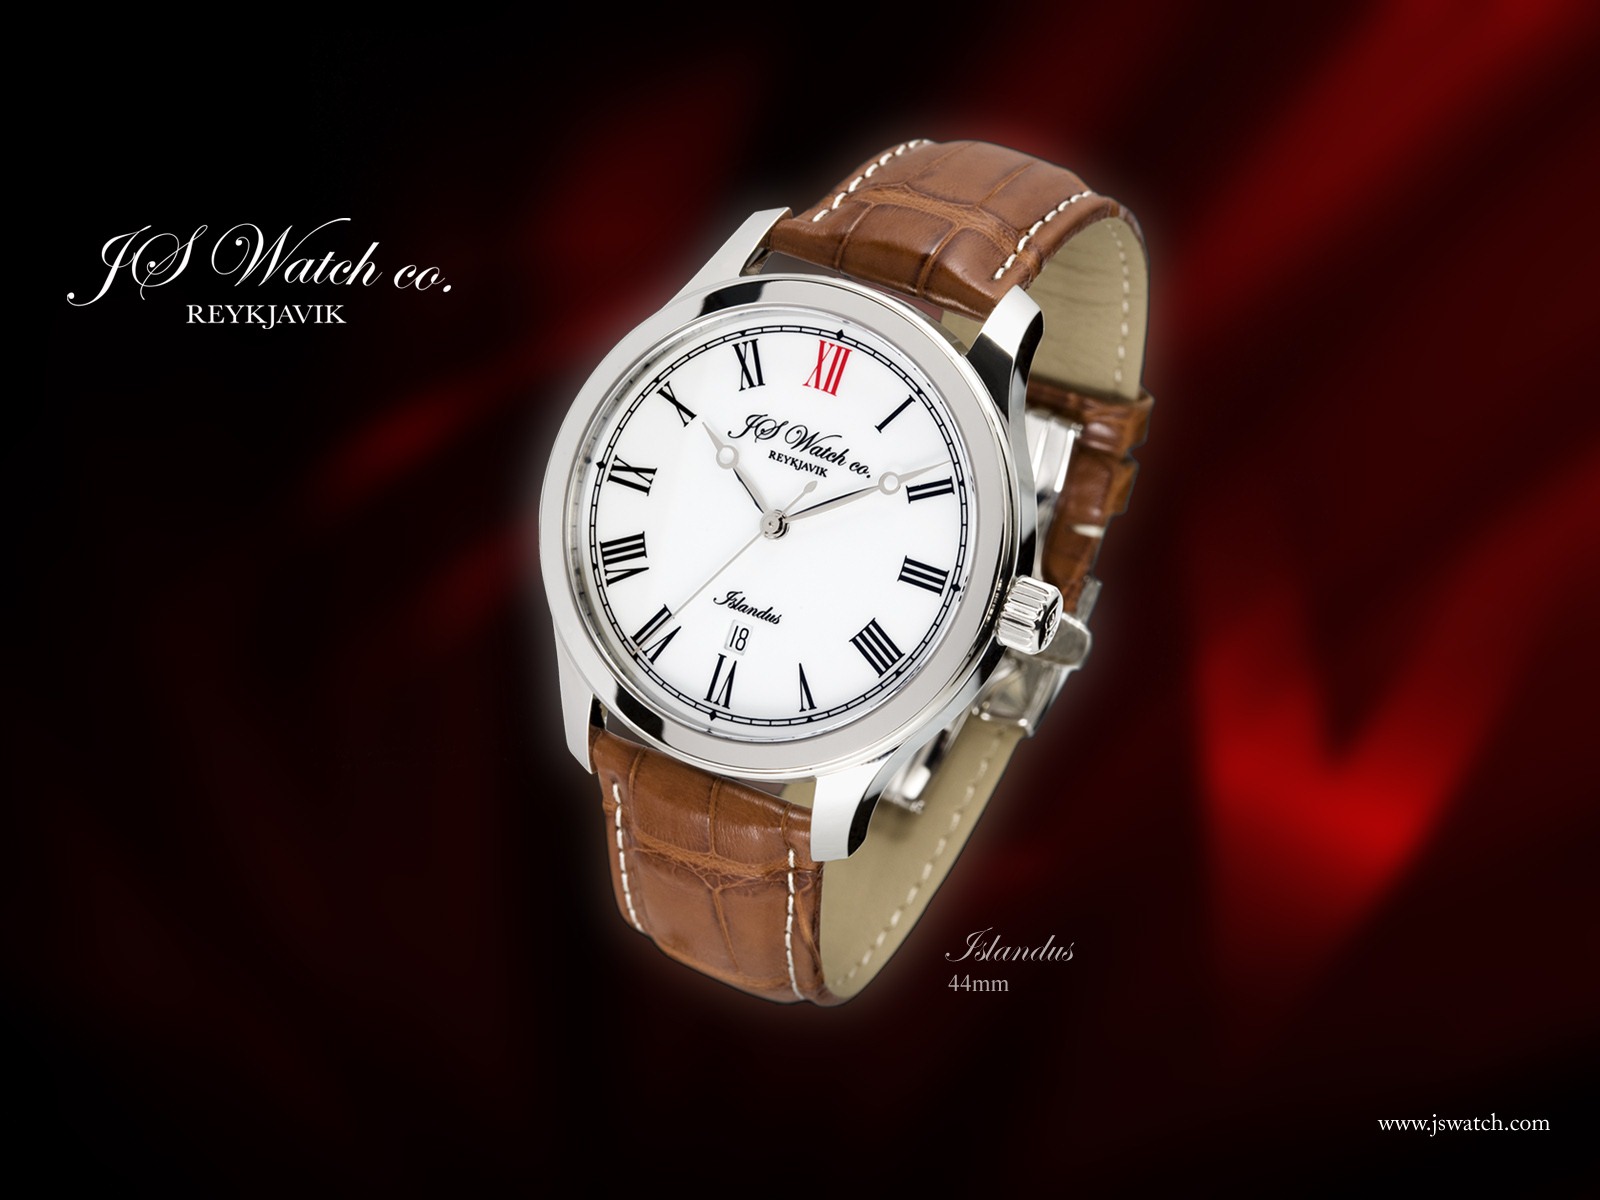 World famous watches wallpapers (2) #1 - 1600x1200